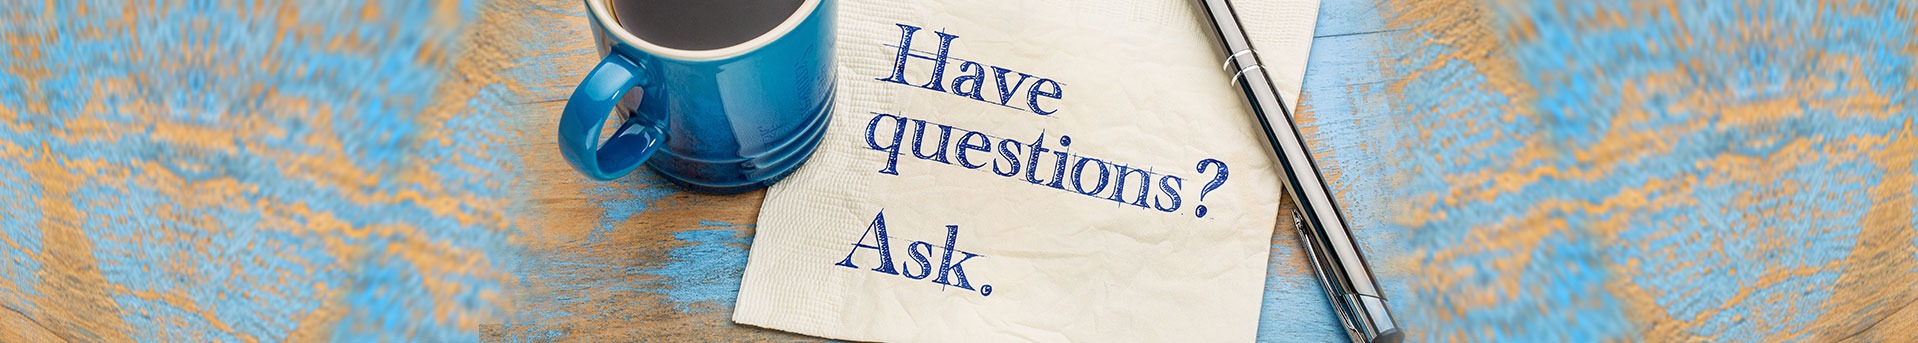 Coffee cup, pen, and paper with Have questions? Ask.